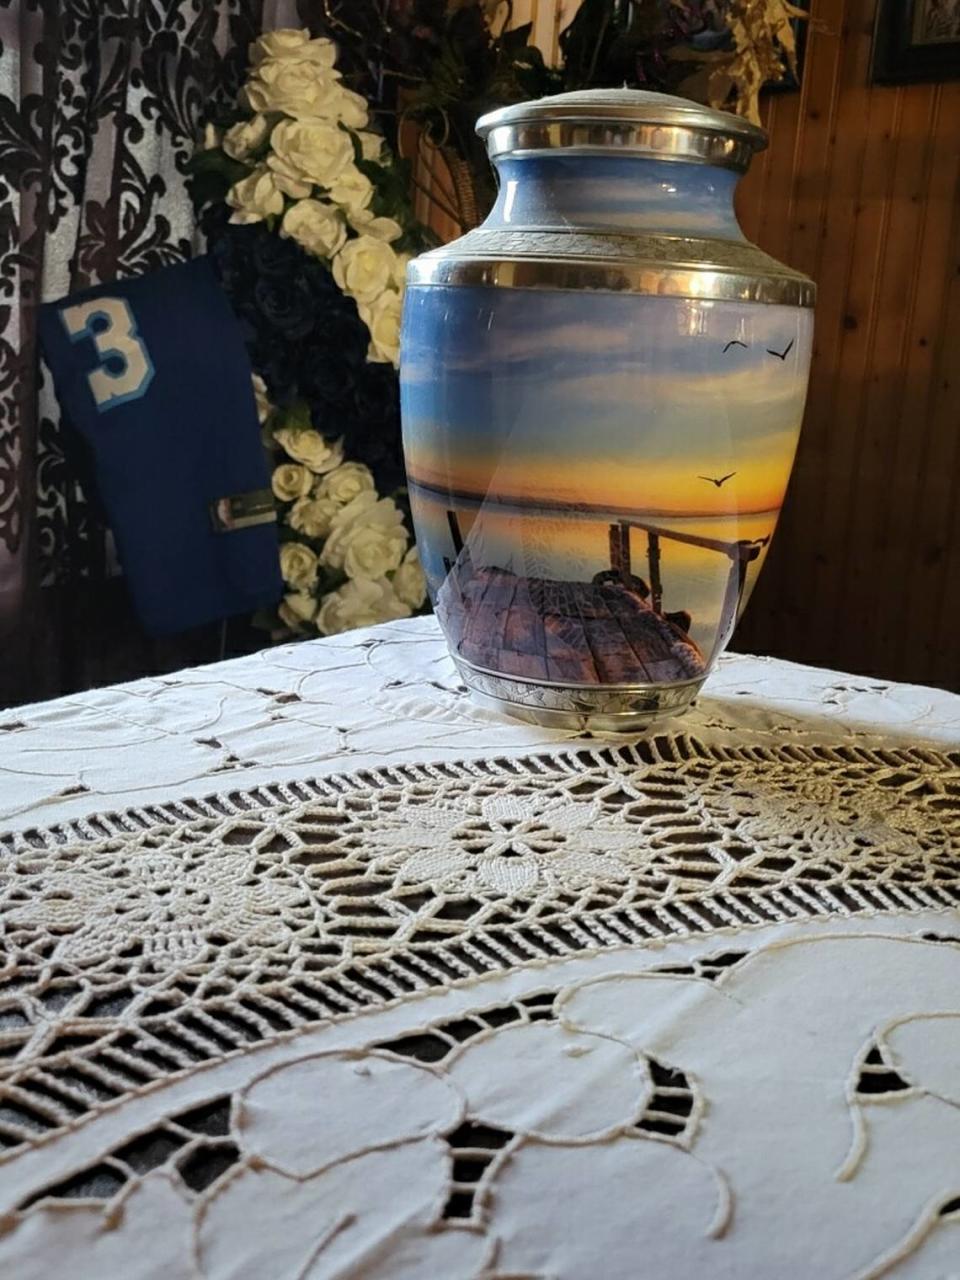 The urn holding Trevon Perry’s ashes in his family’s home.